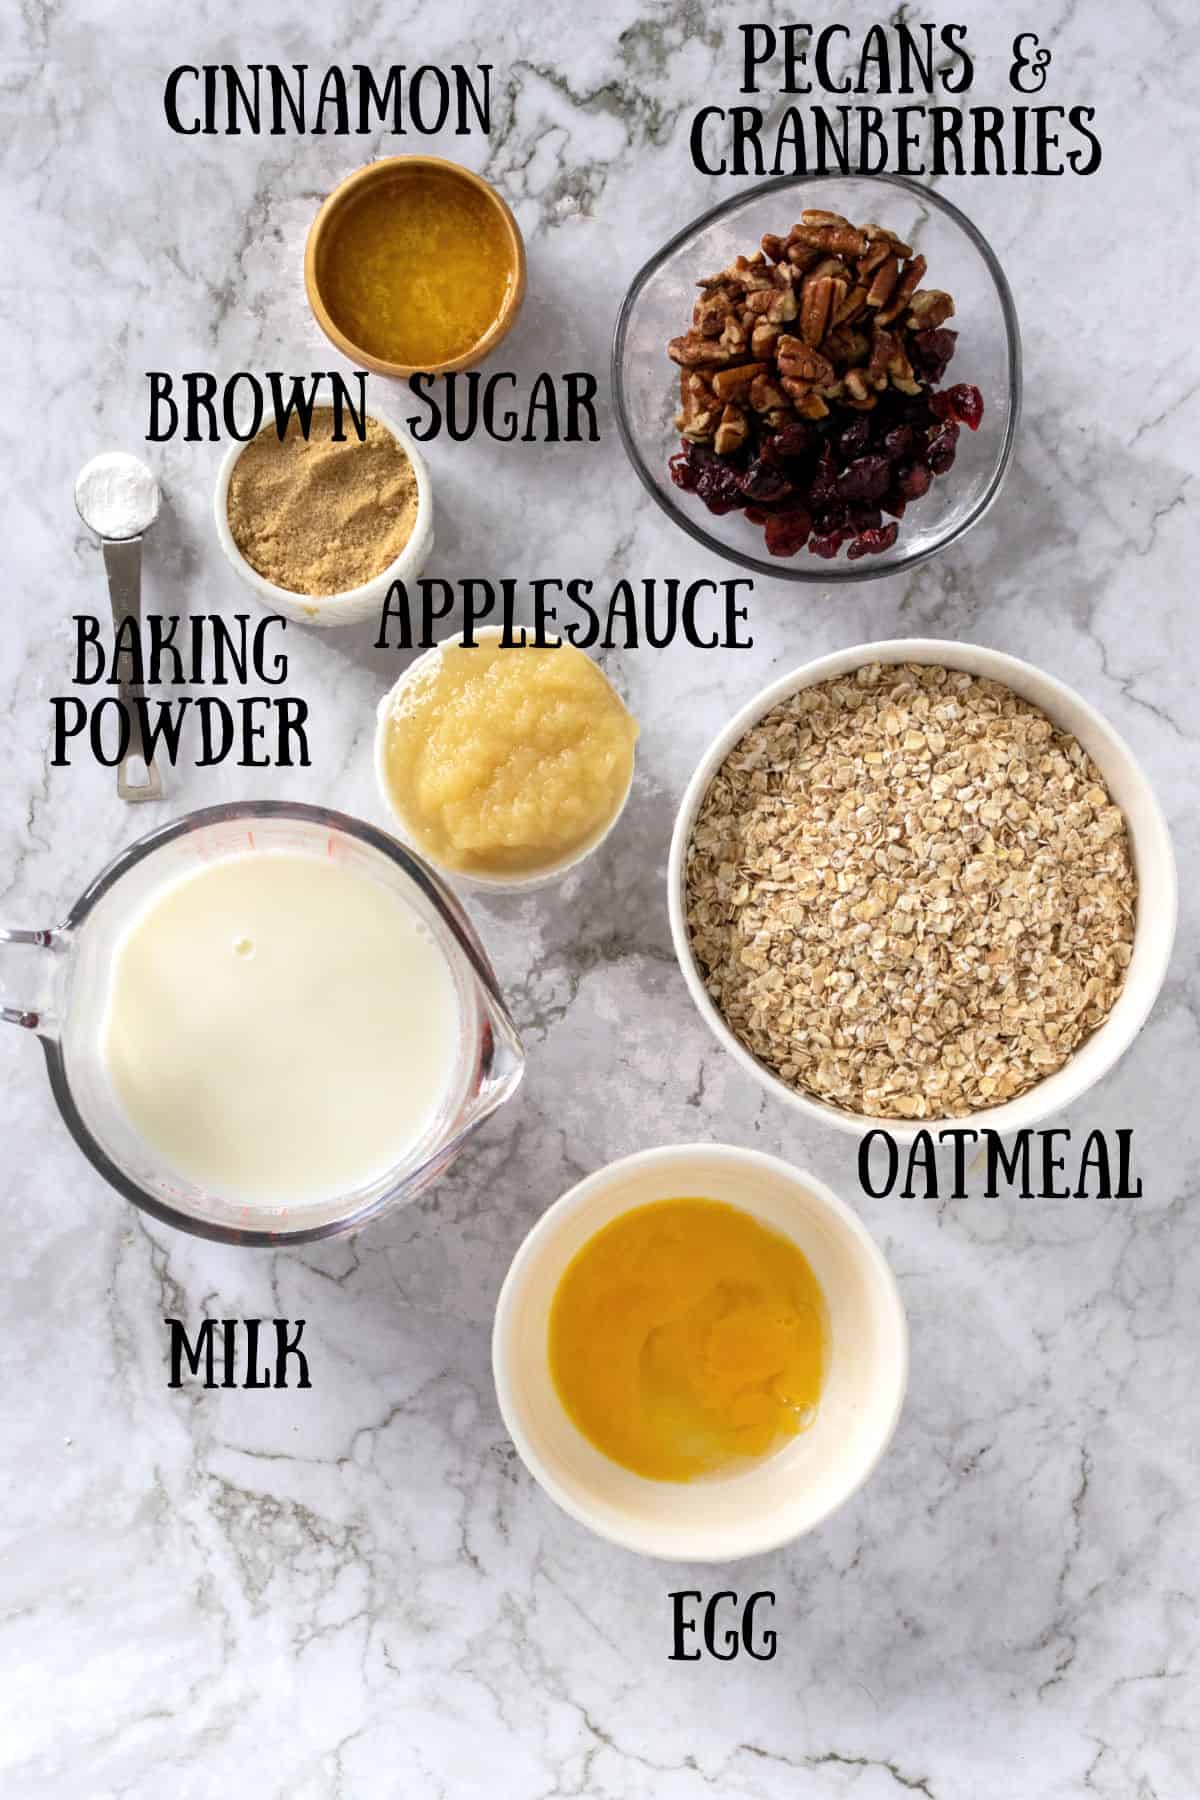 Ingredients for oatmeal